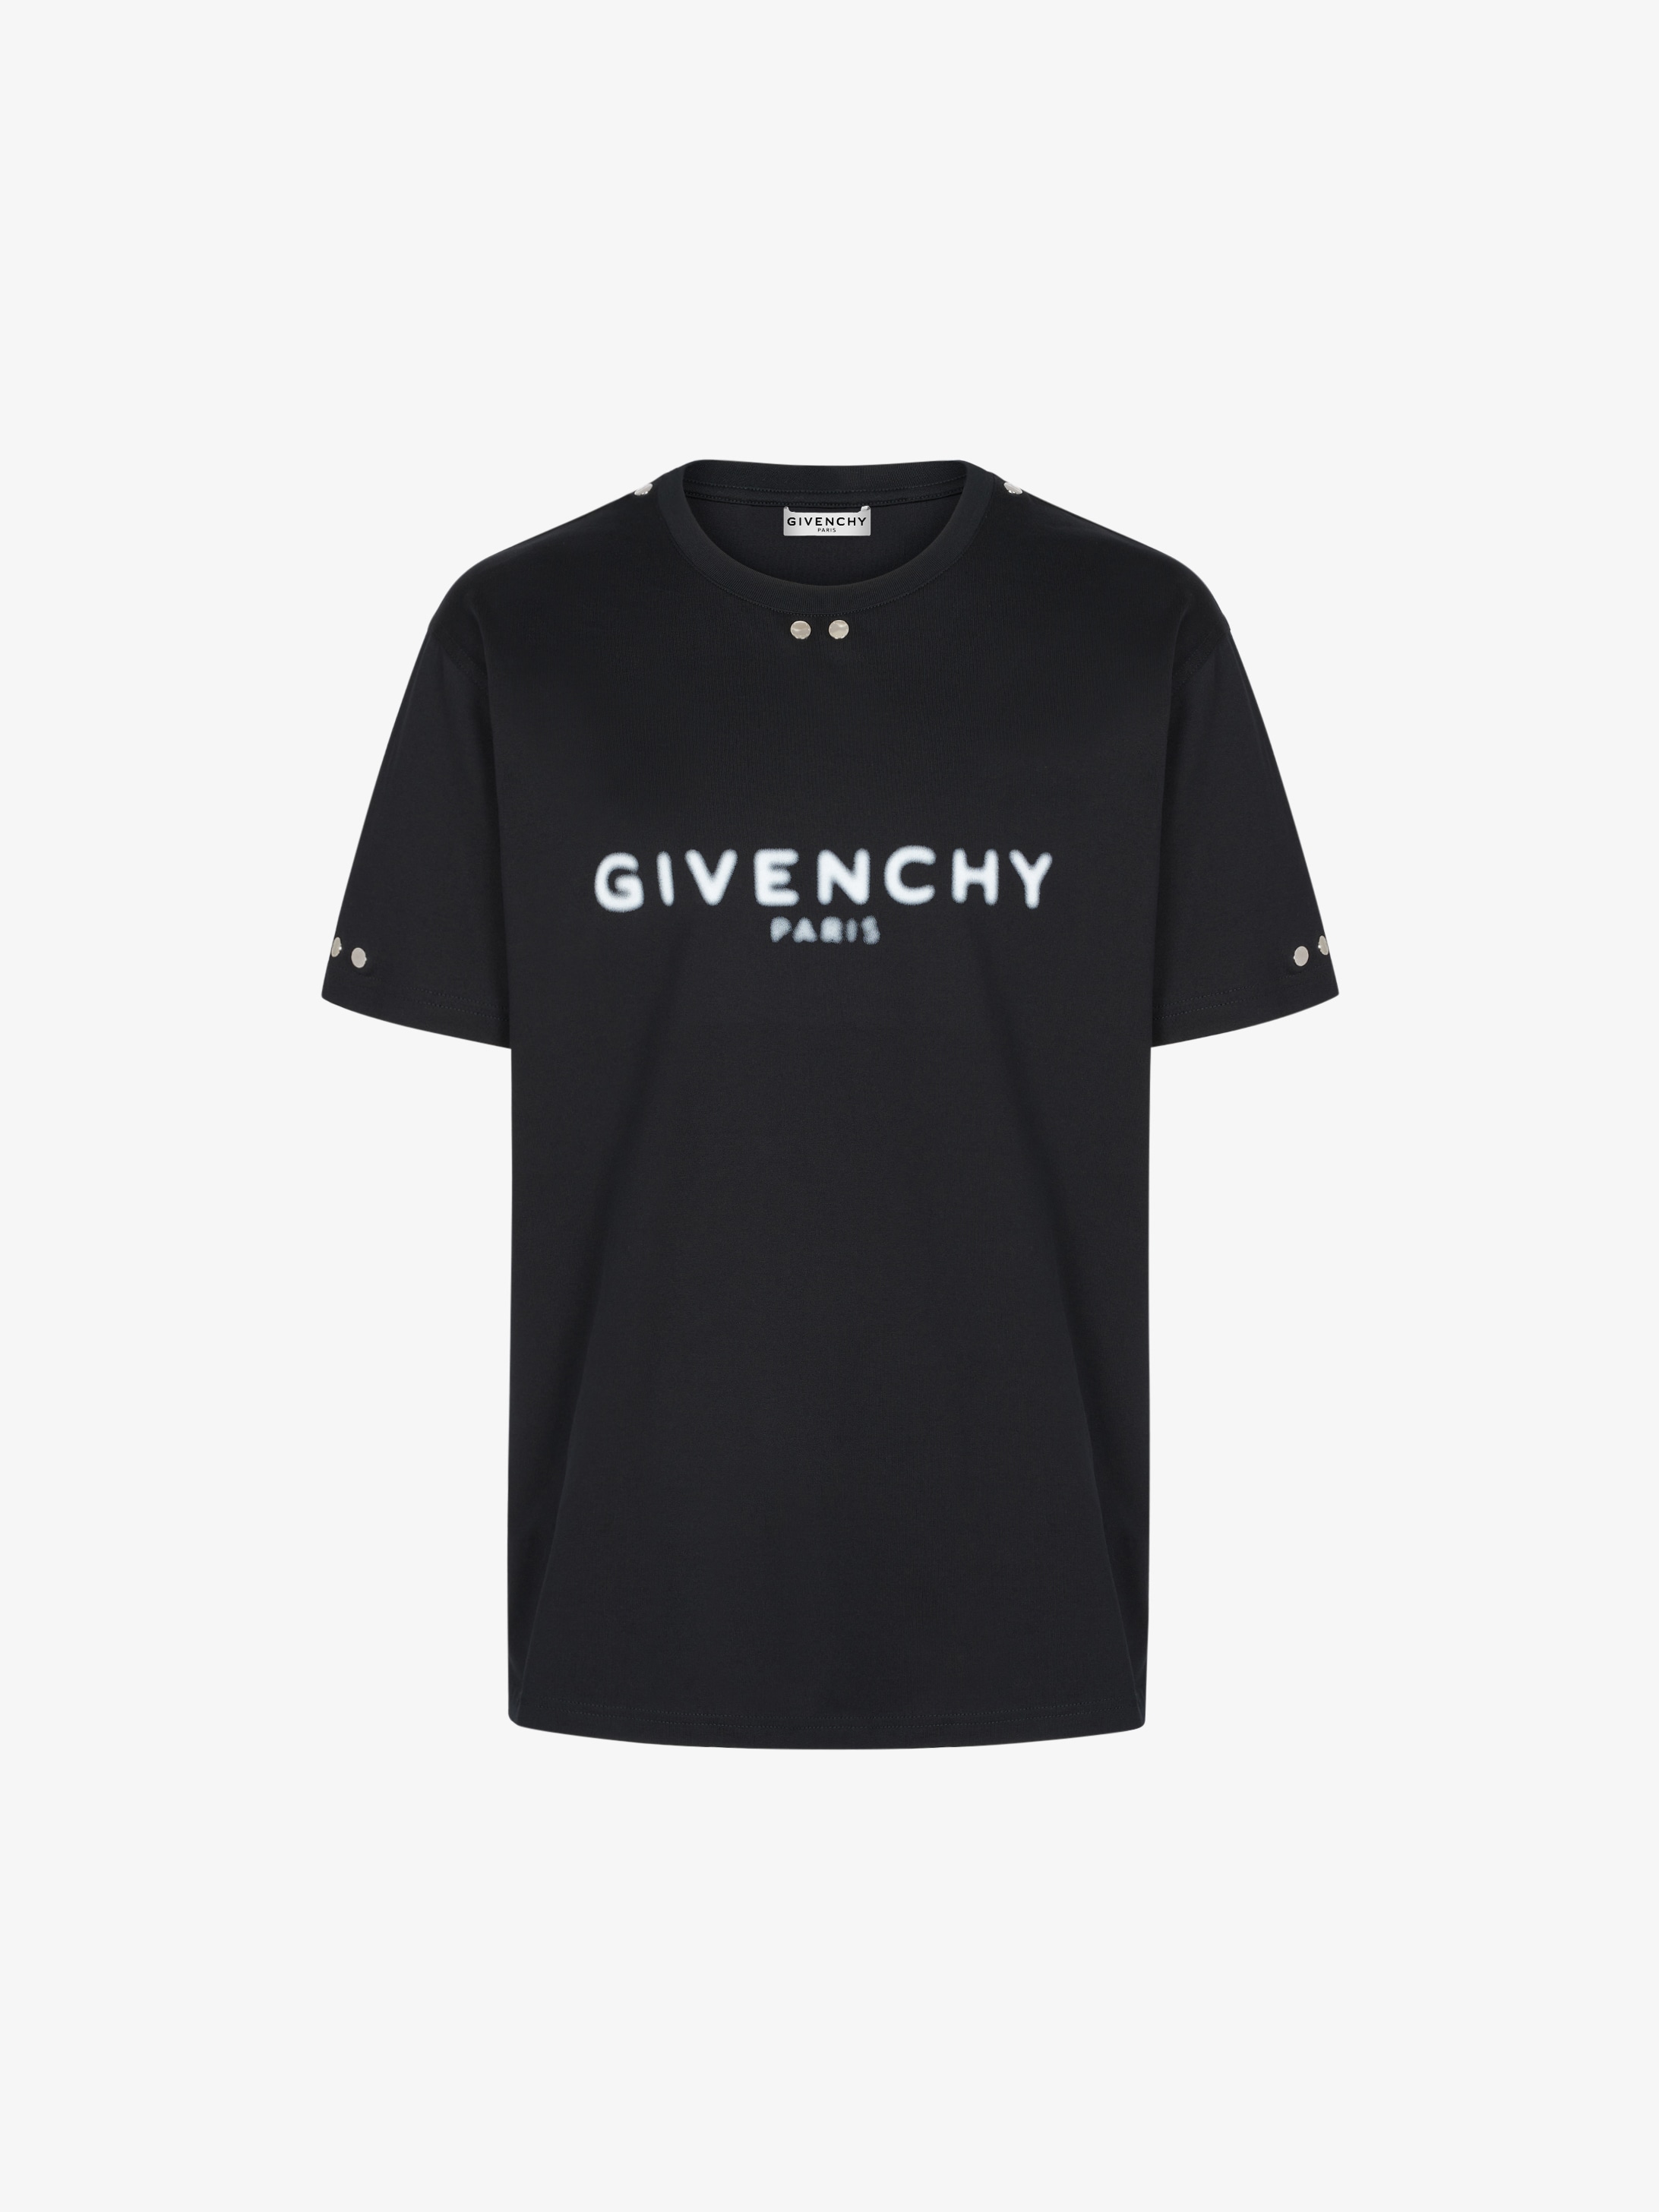 black and white givenchy t shirt